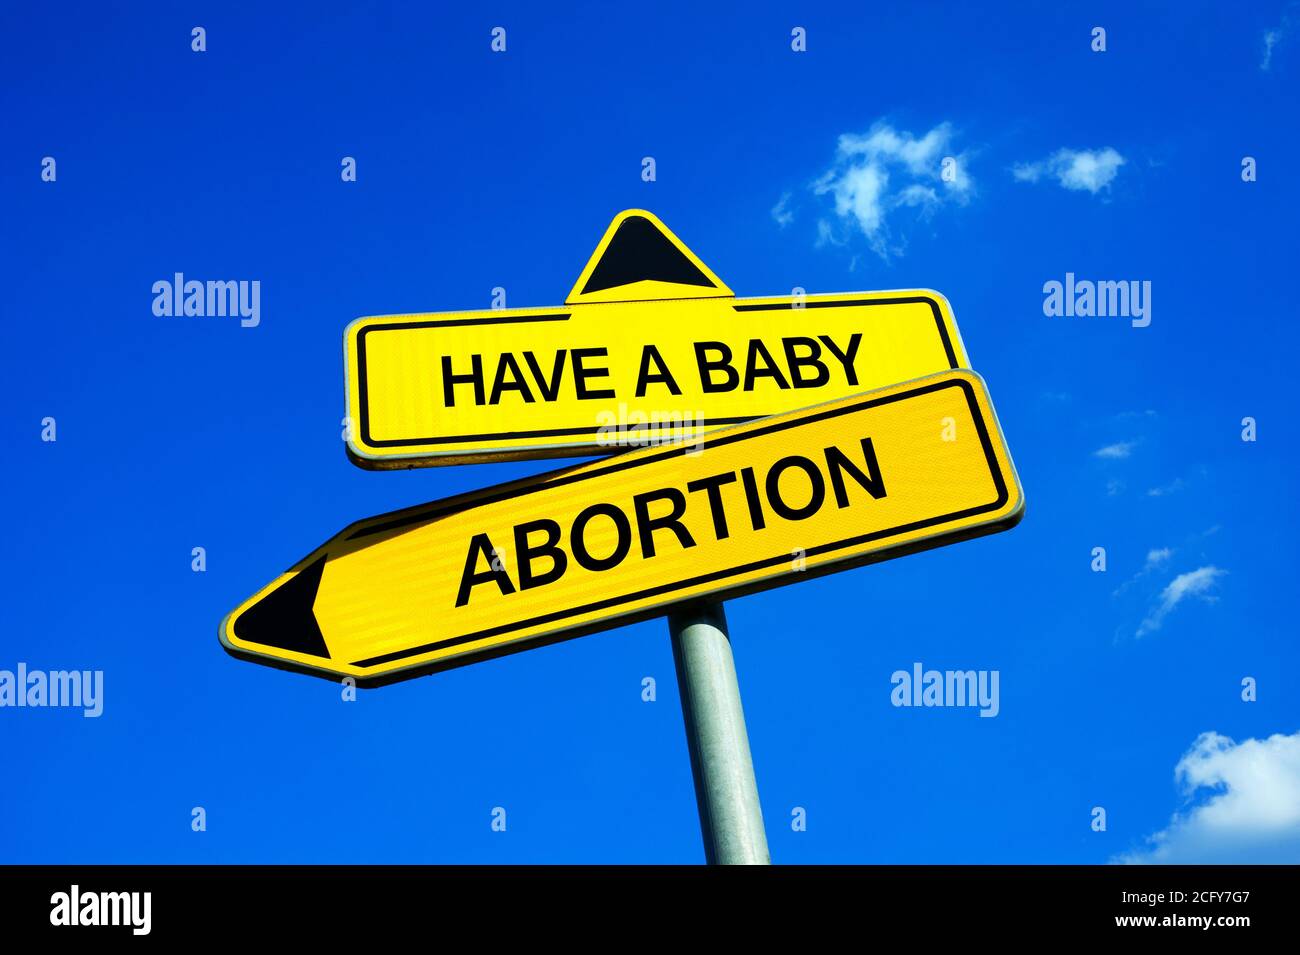 Have a baby or Abortion - Traffic sign with two options - mother and dilemma of killing foetus because of unwanted or unintended pregnancy Stock Photo